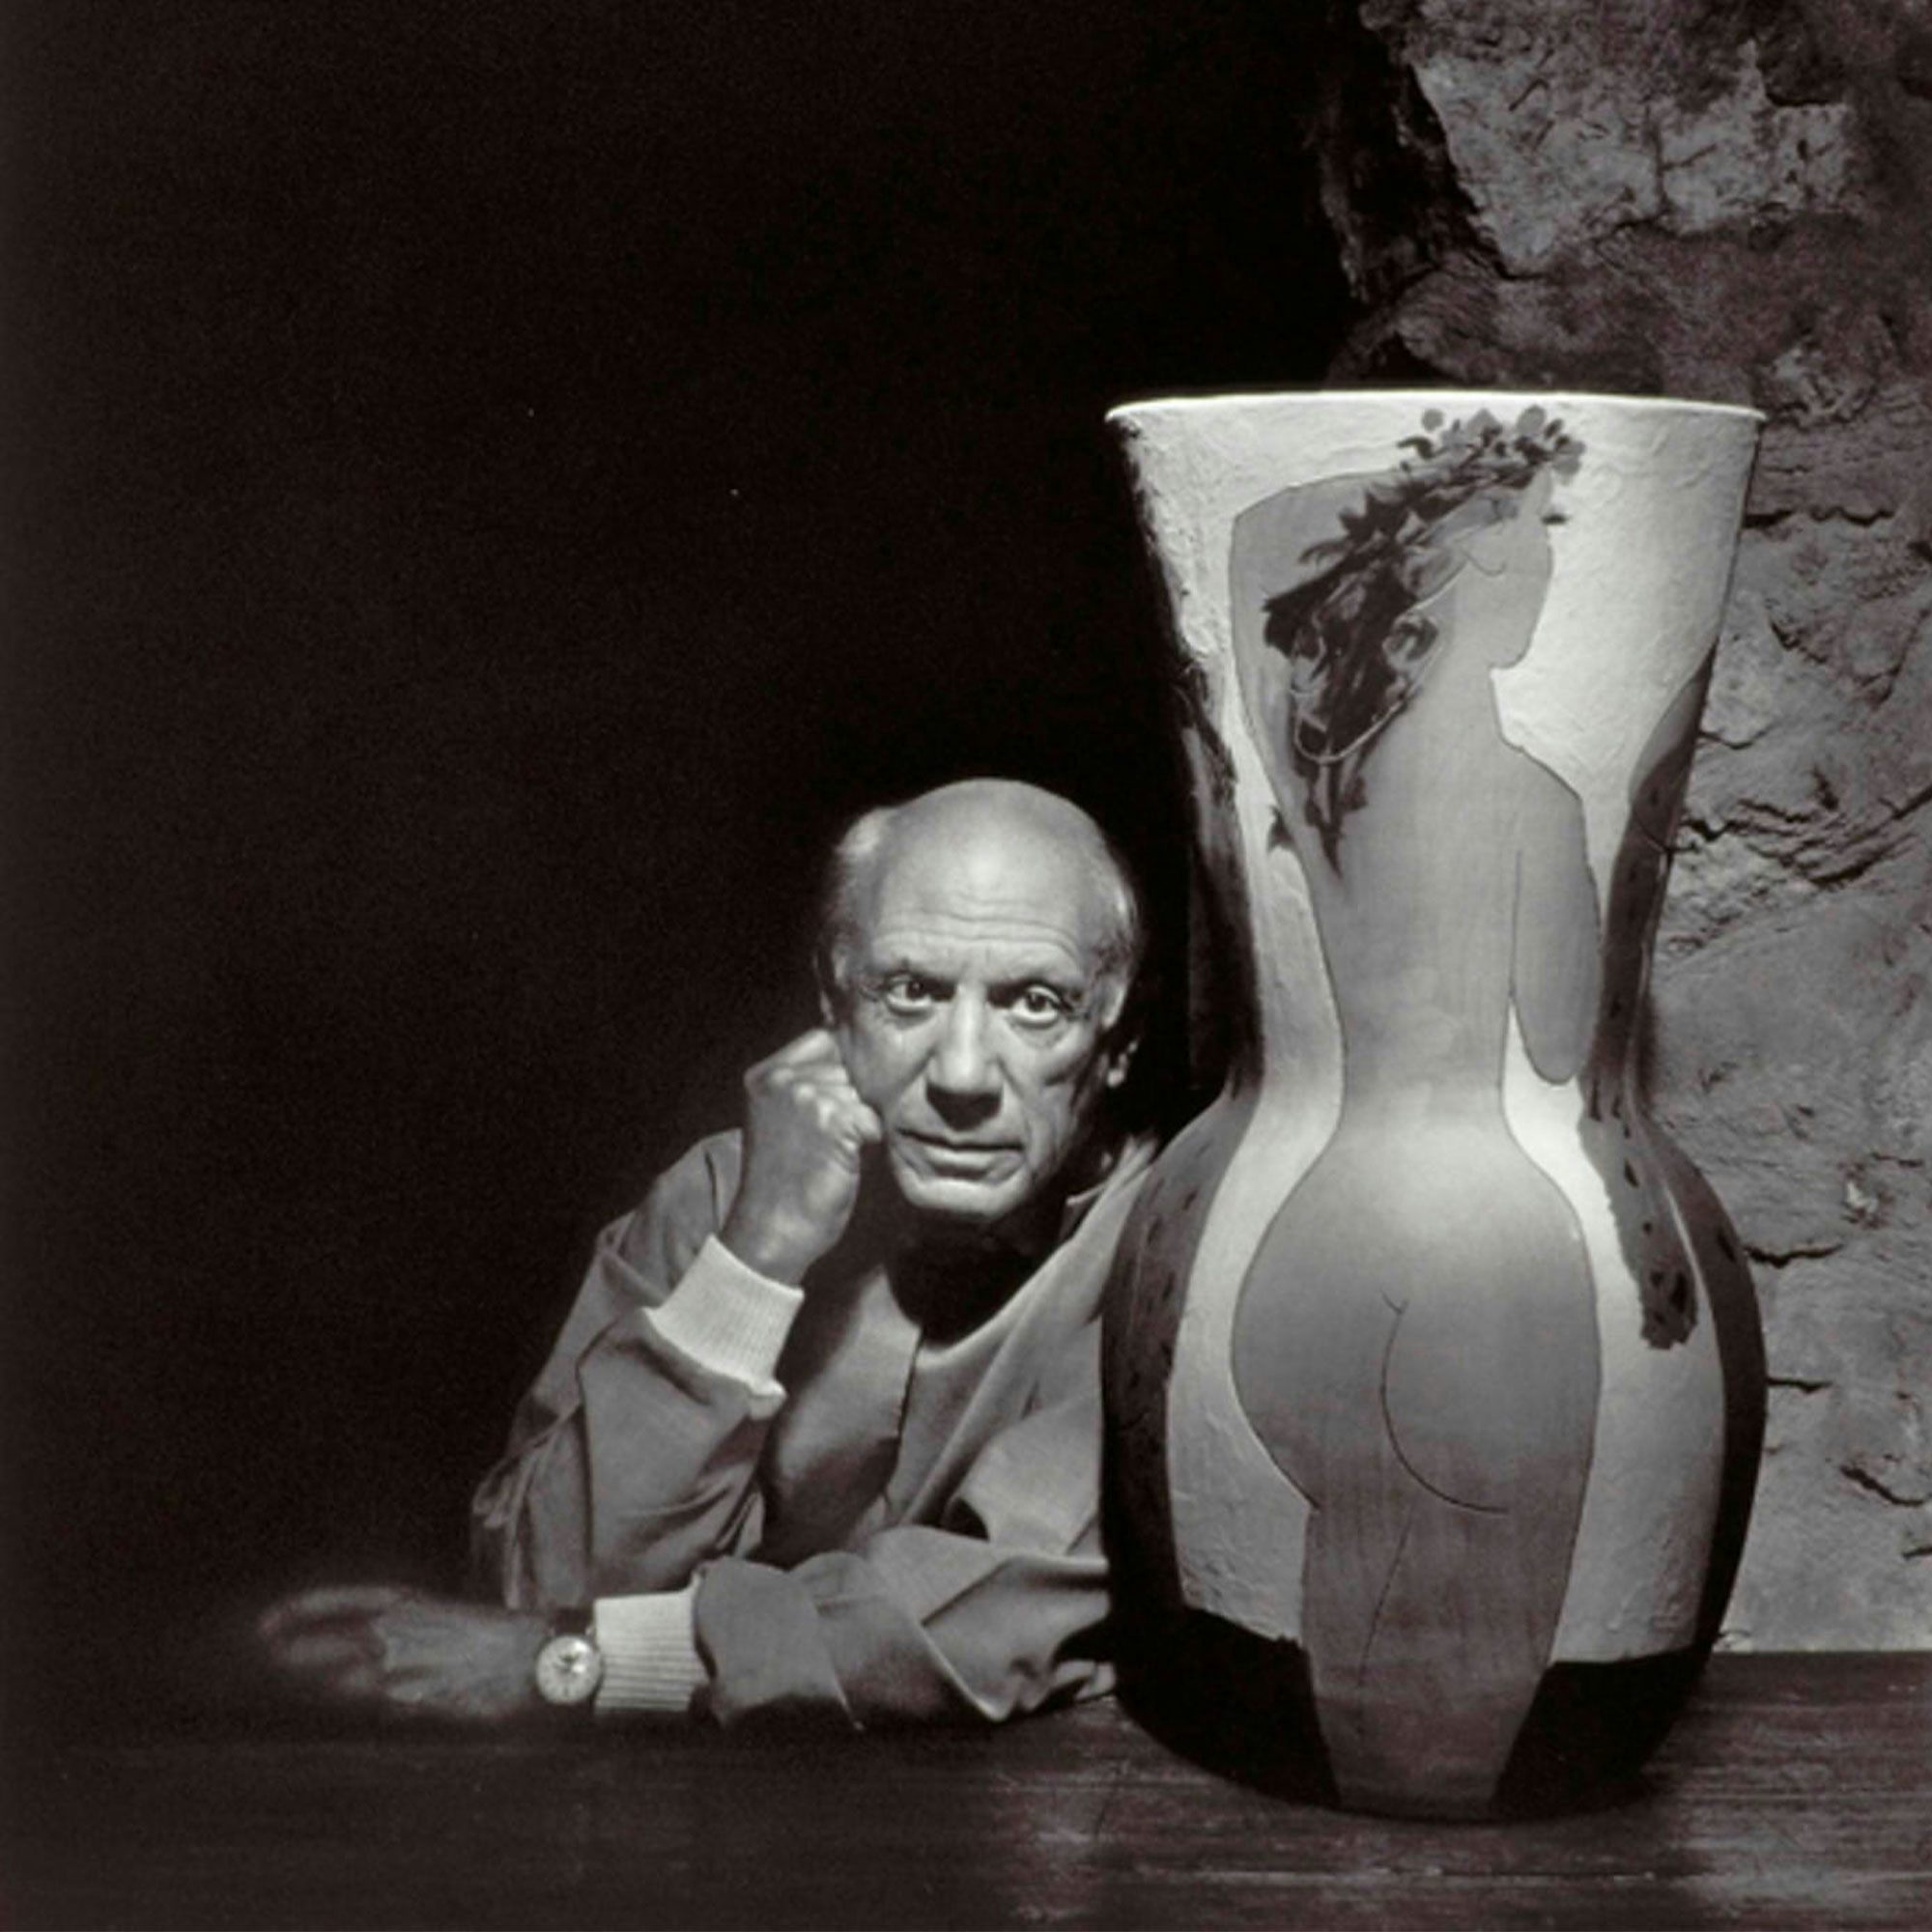 Pablo Picasso poses next to a vase, wearing a Jaeger-LeCoultre triple calendar.